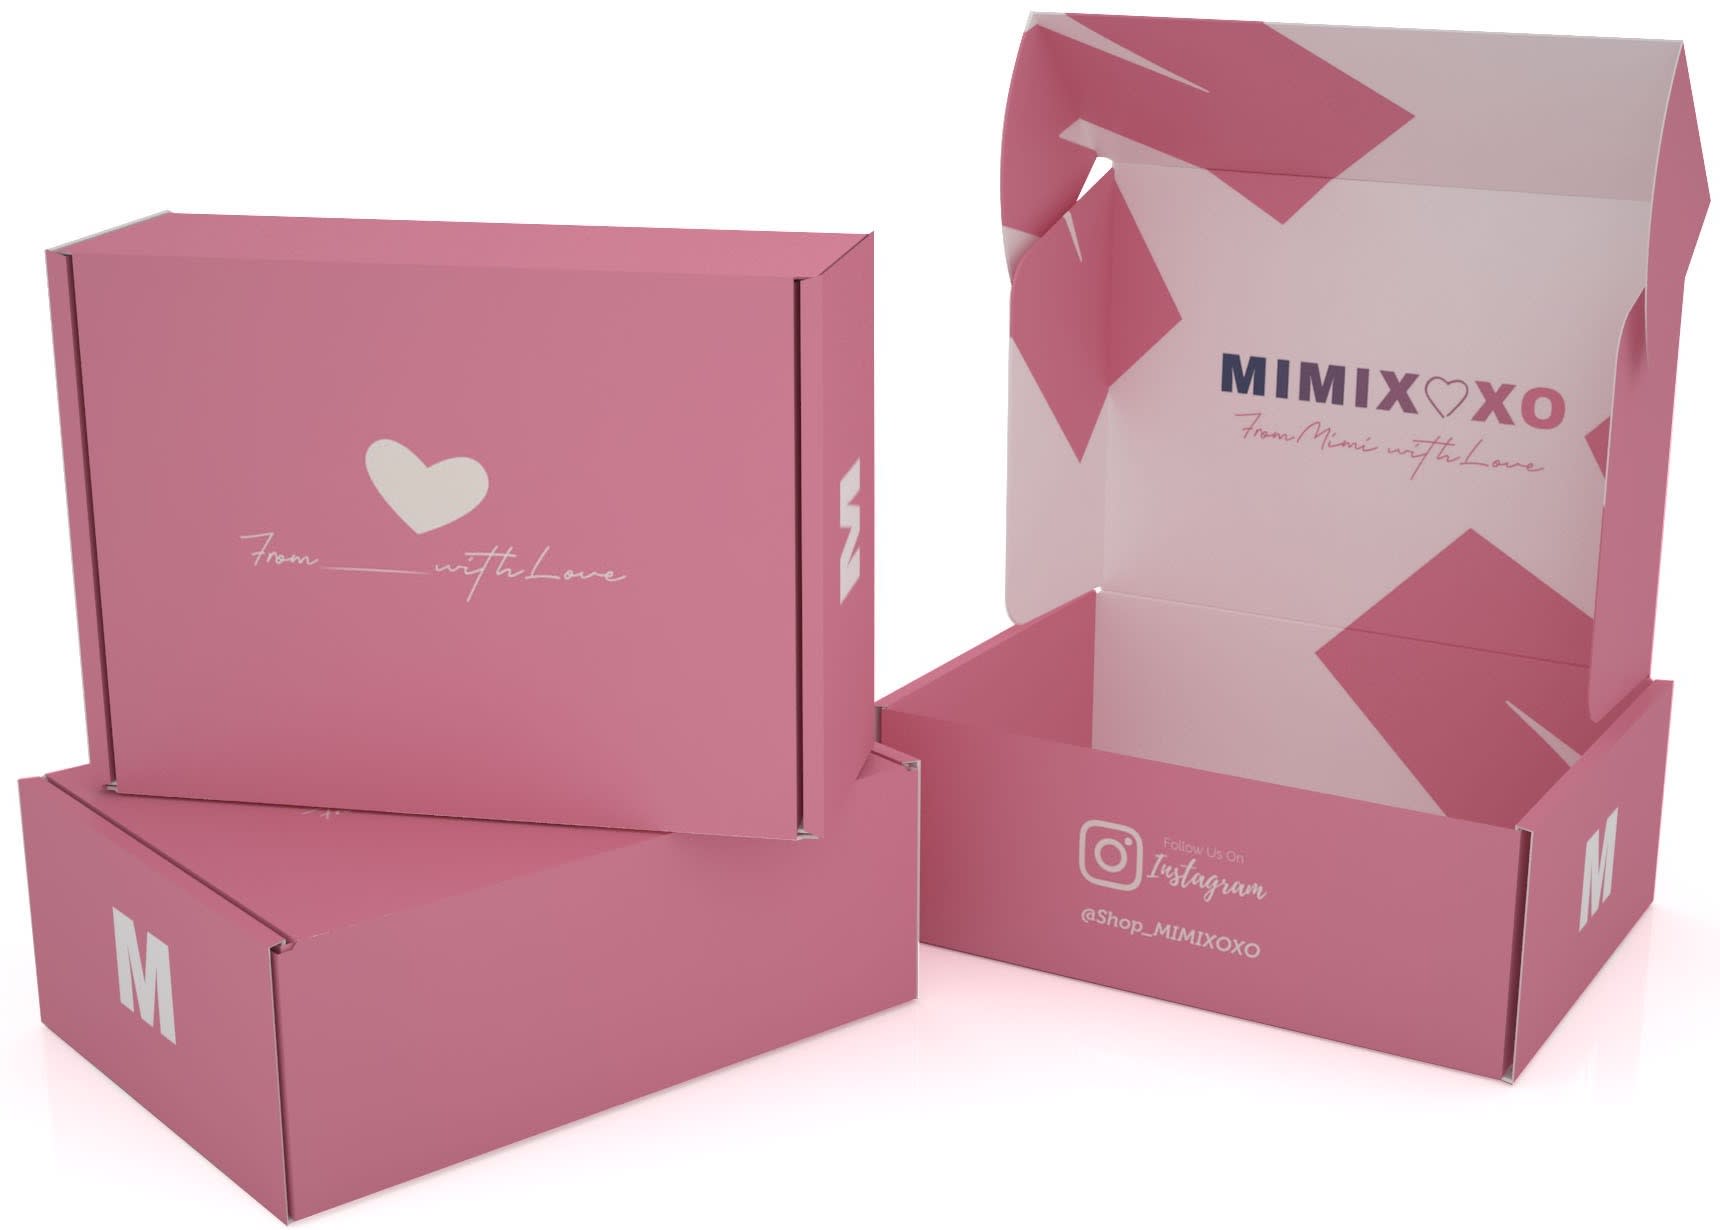 Finds Pink Business Edition  Packaging ideas business, Small  business instagram, Small business packaging ideas